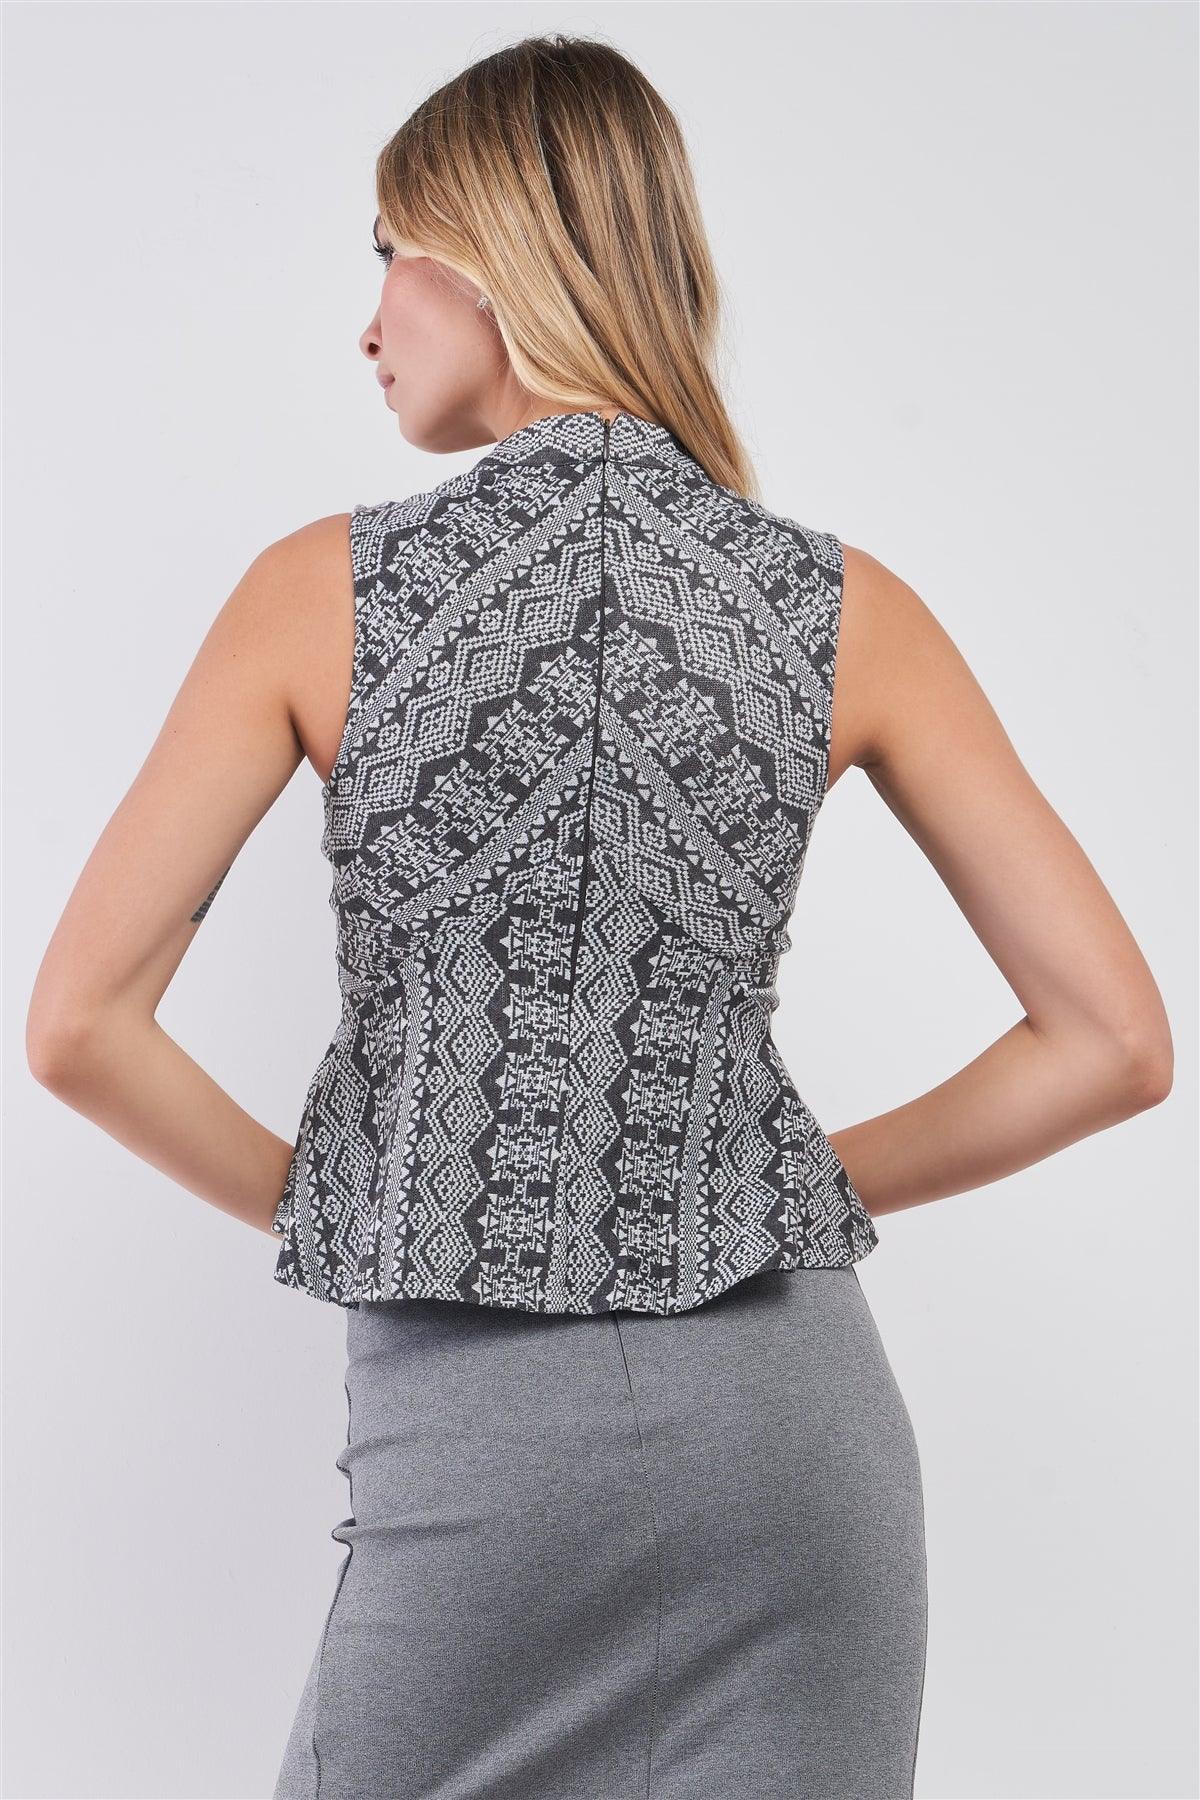 Charcoal Grey Damask-Inspired Geometric Pattern Print Sleeveless Mock Neck Fit & Flare Top /1-2-2-1